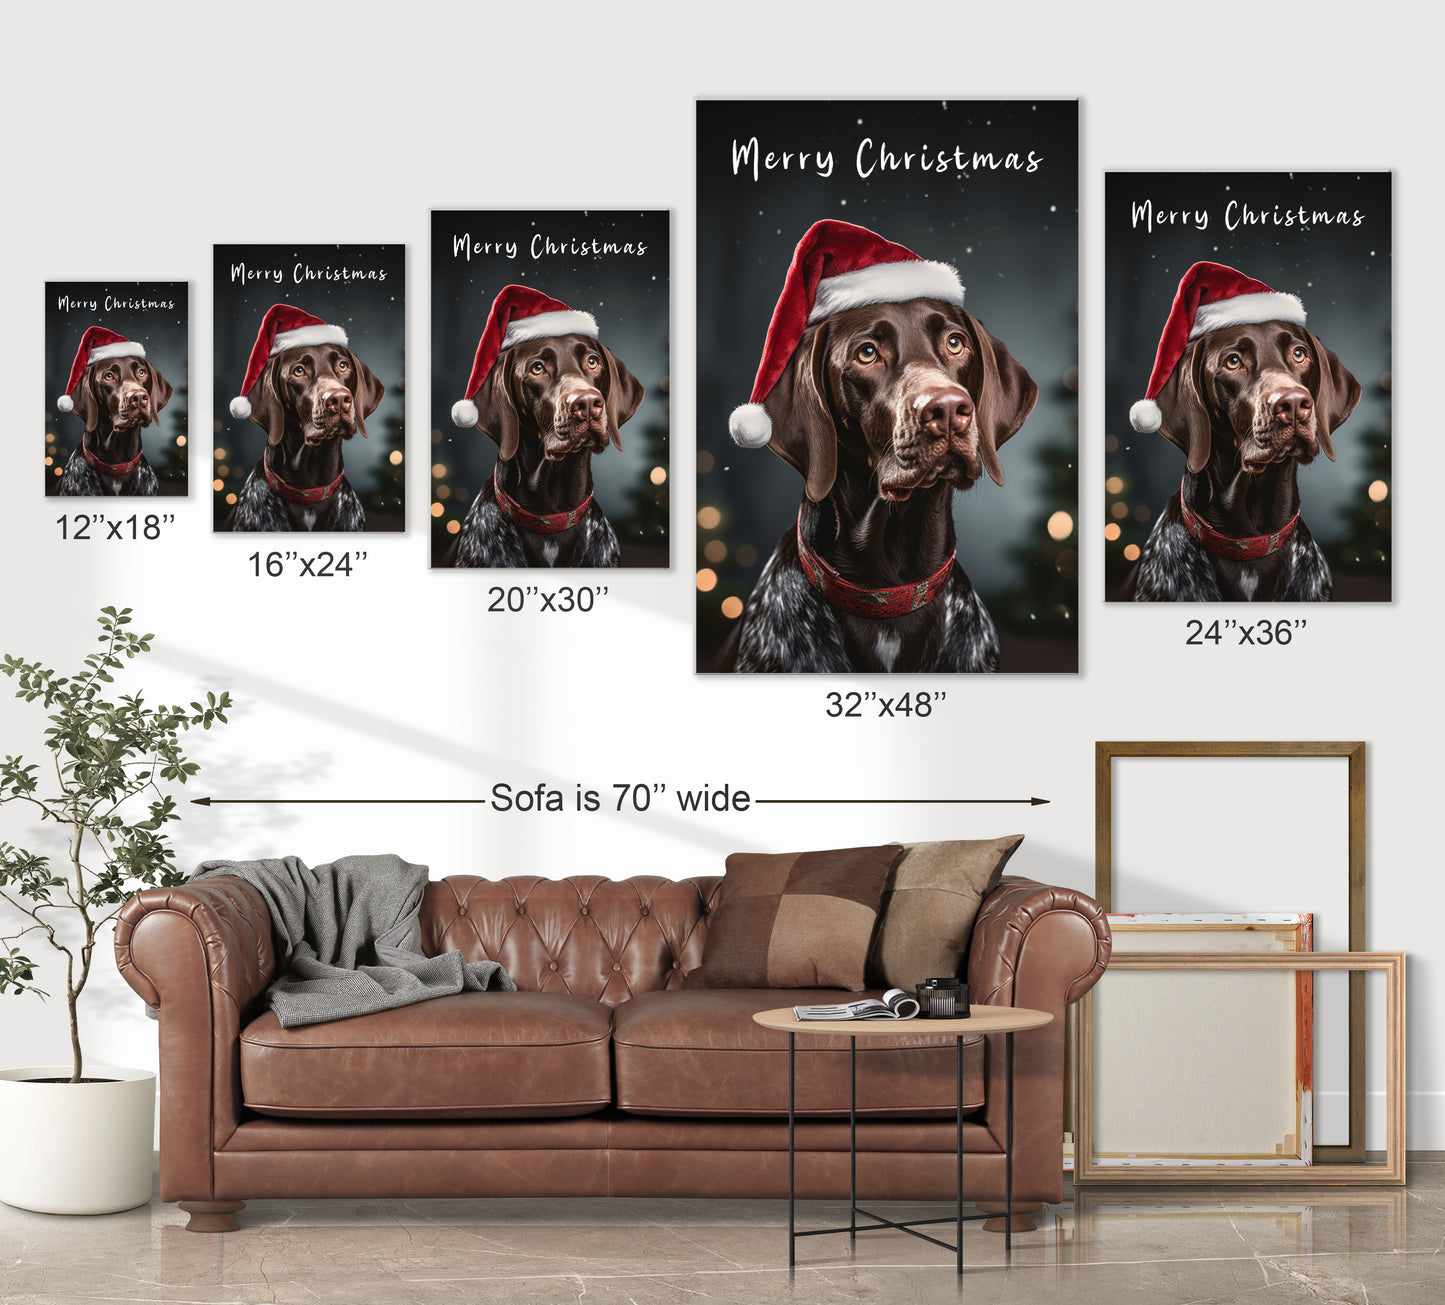 Christmas Merry Christmas German Shorthaired Pointer wearing Santa’s hat wall decor